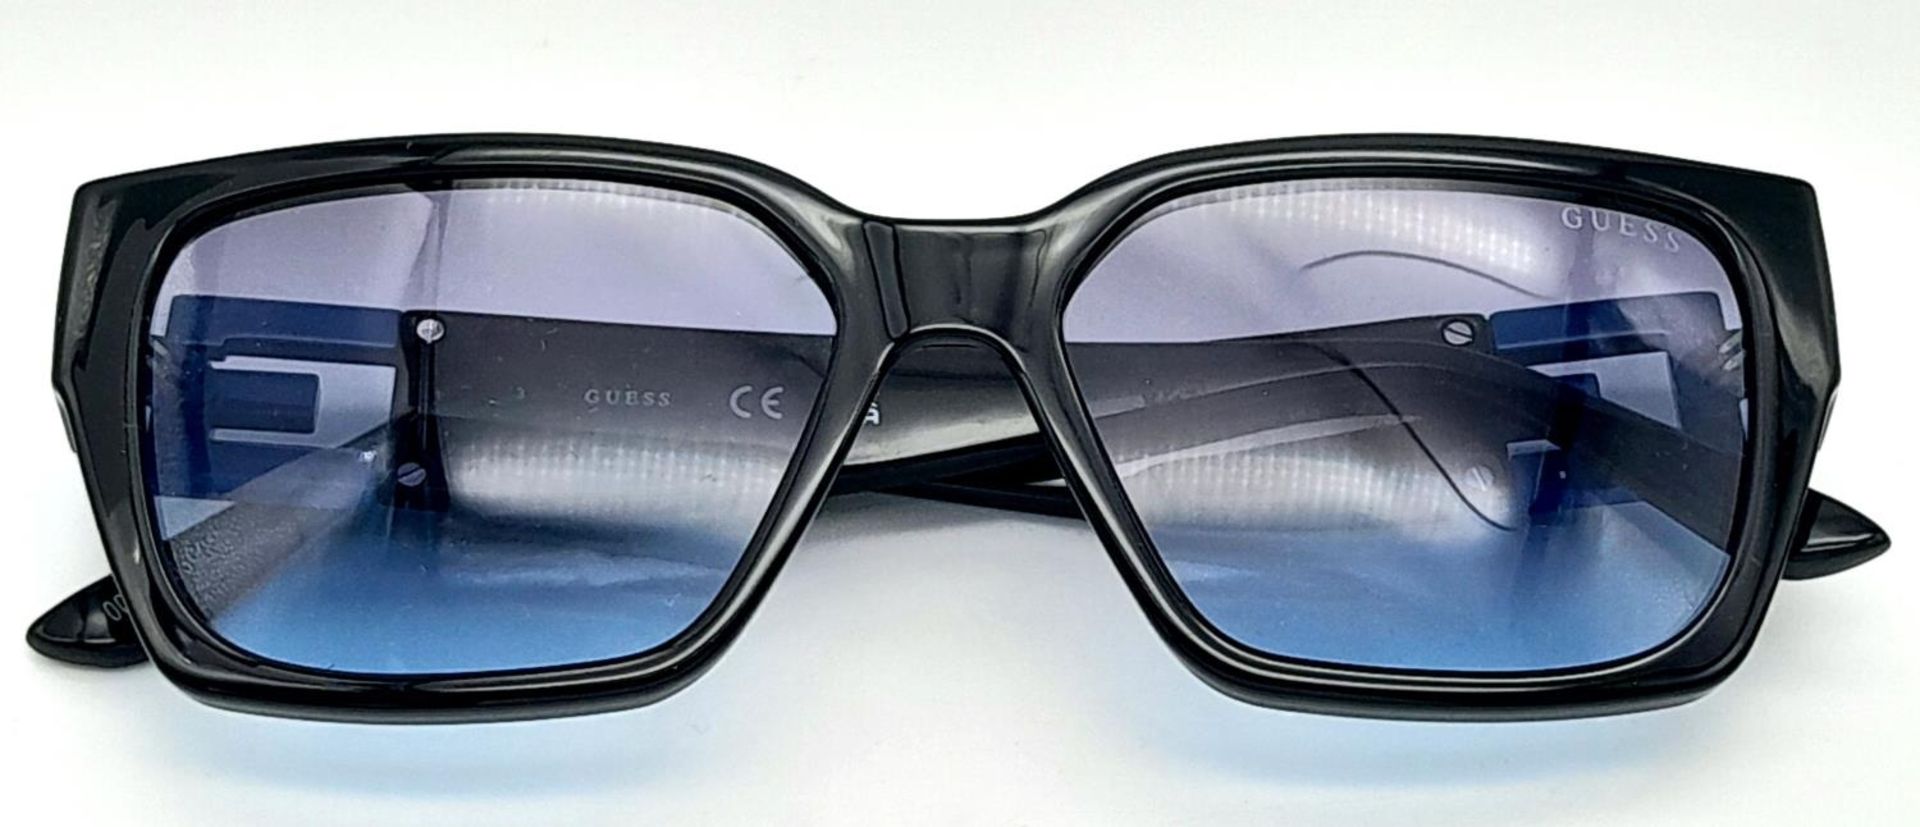 A Pair of Designer Guess Sunglasses. - Image 2 of 5